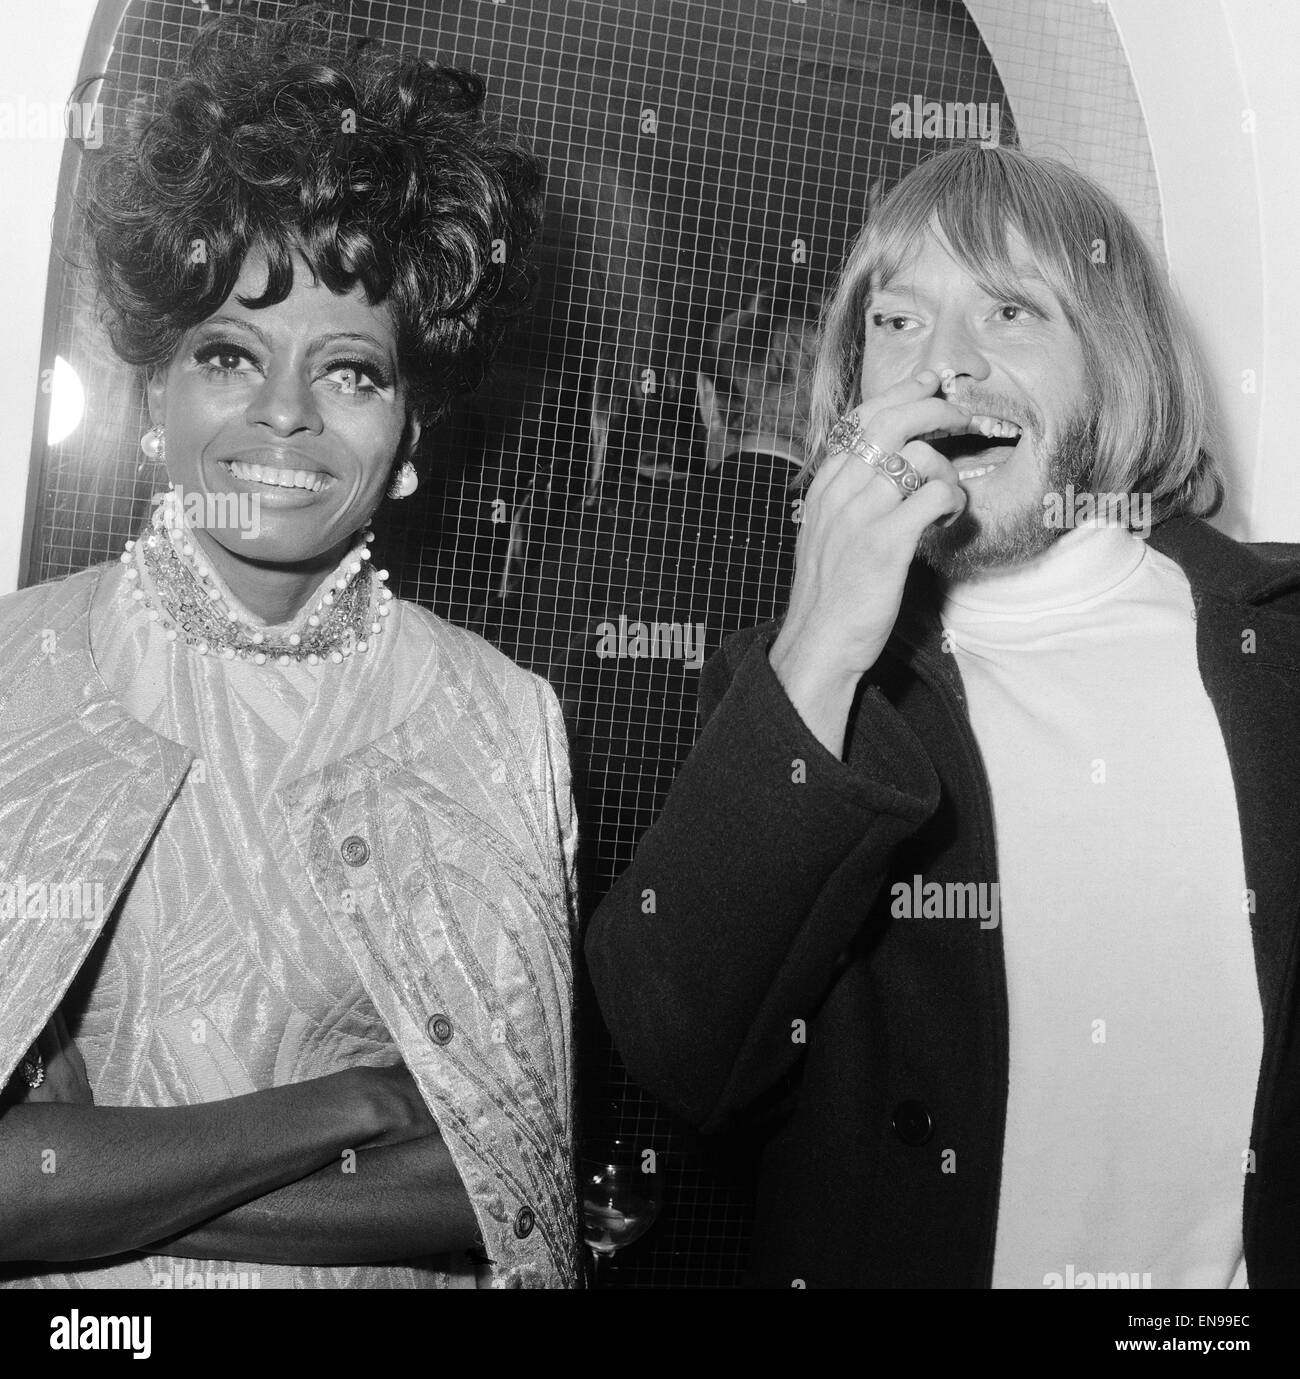 Brian Jones of The Rolling Stones and Diana Ross of The Supremes at the John Bull's restaurant in King's Road, Chelsea. 28th January 1968. Stock Photo